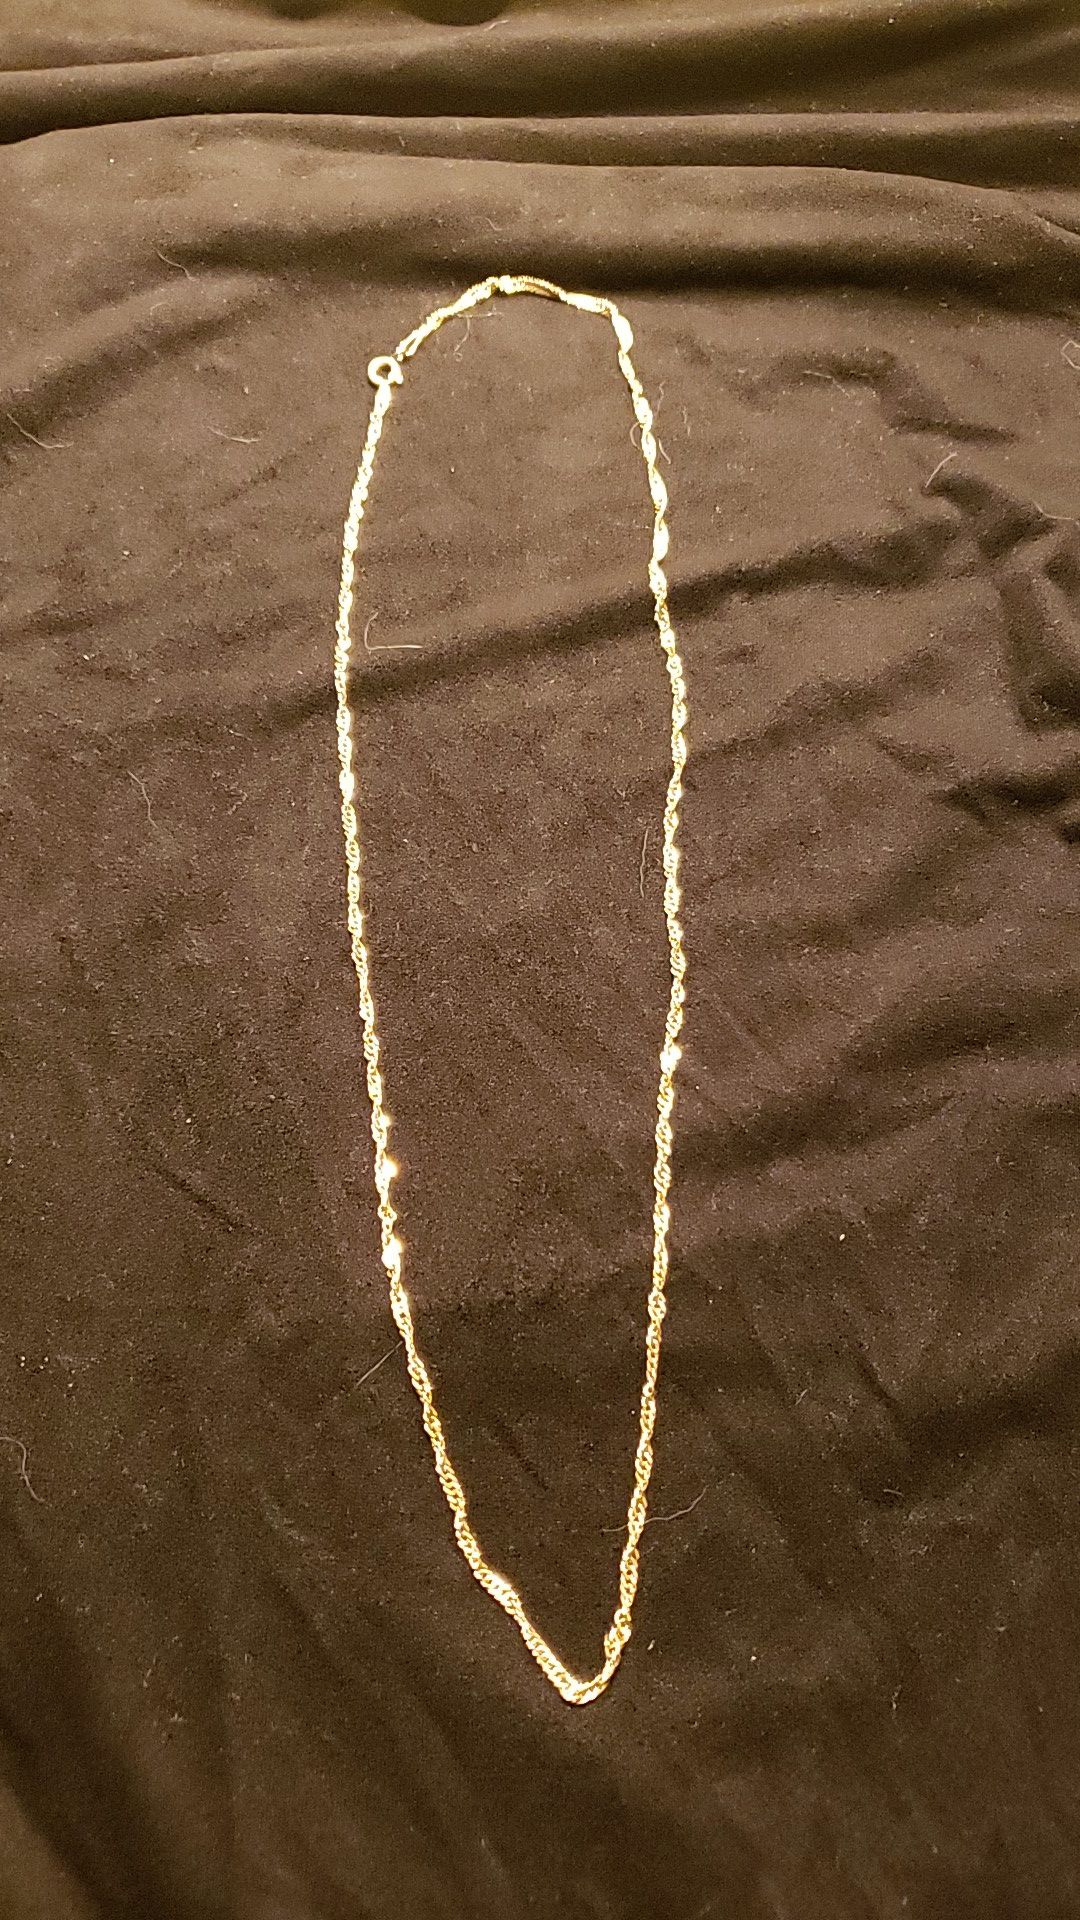 14kt Gold 5.6g Necklace rope chain